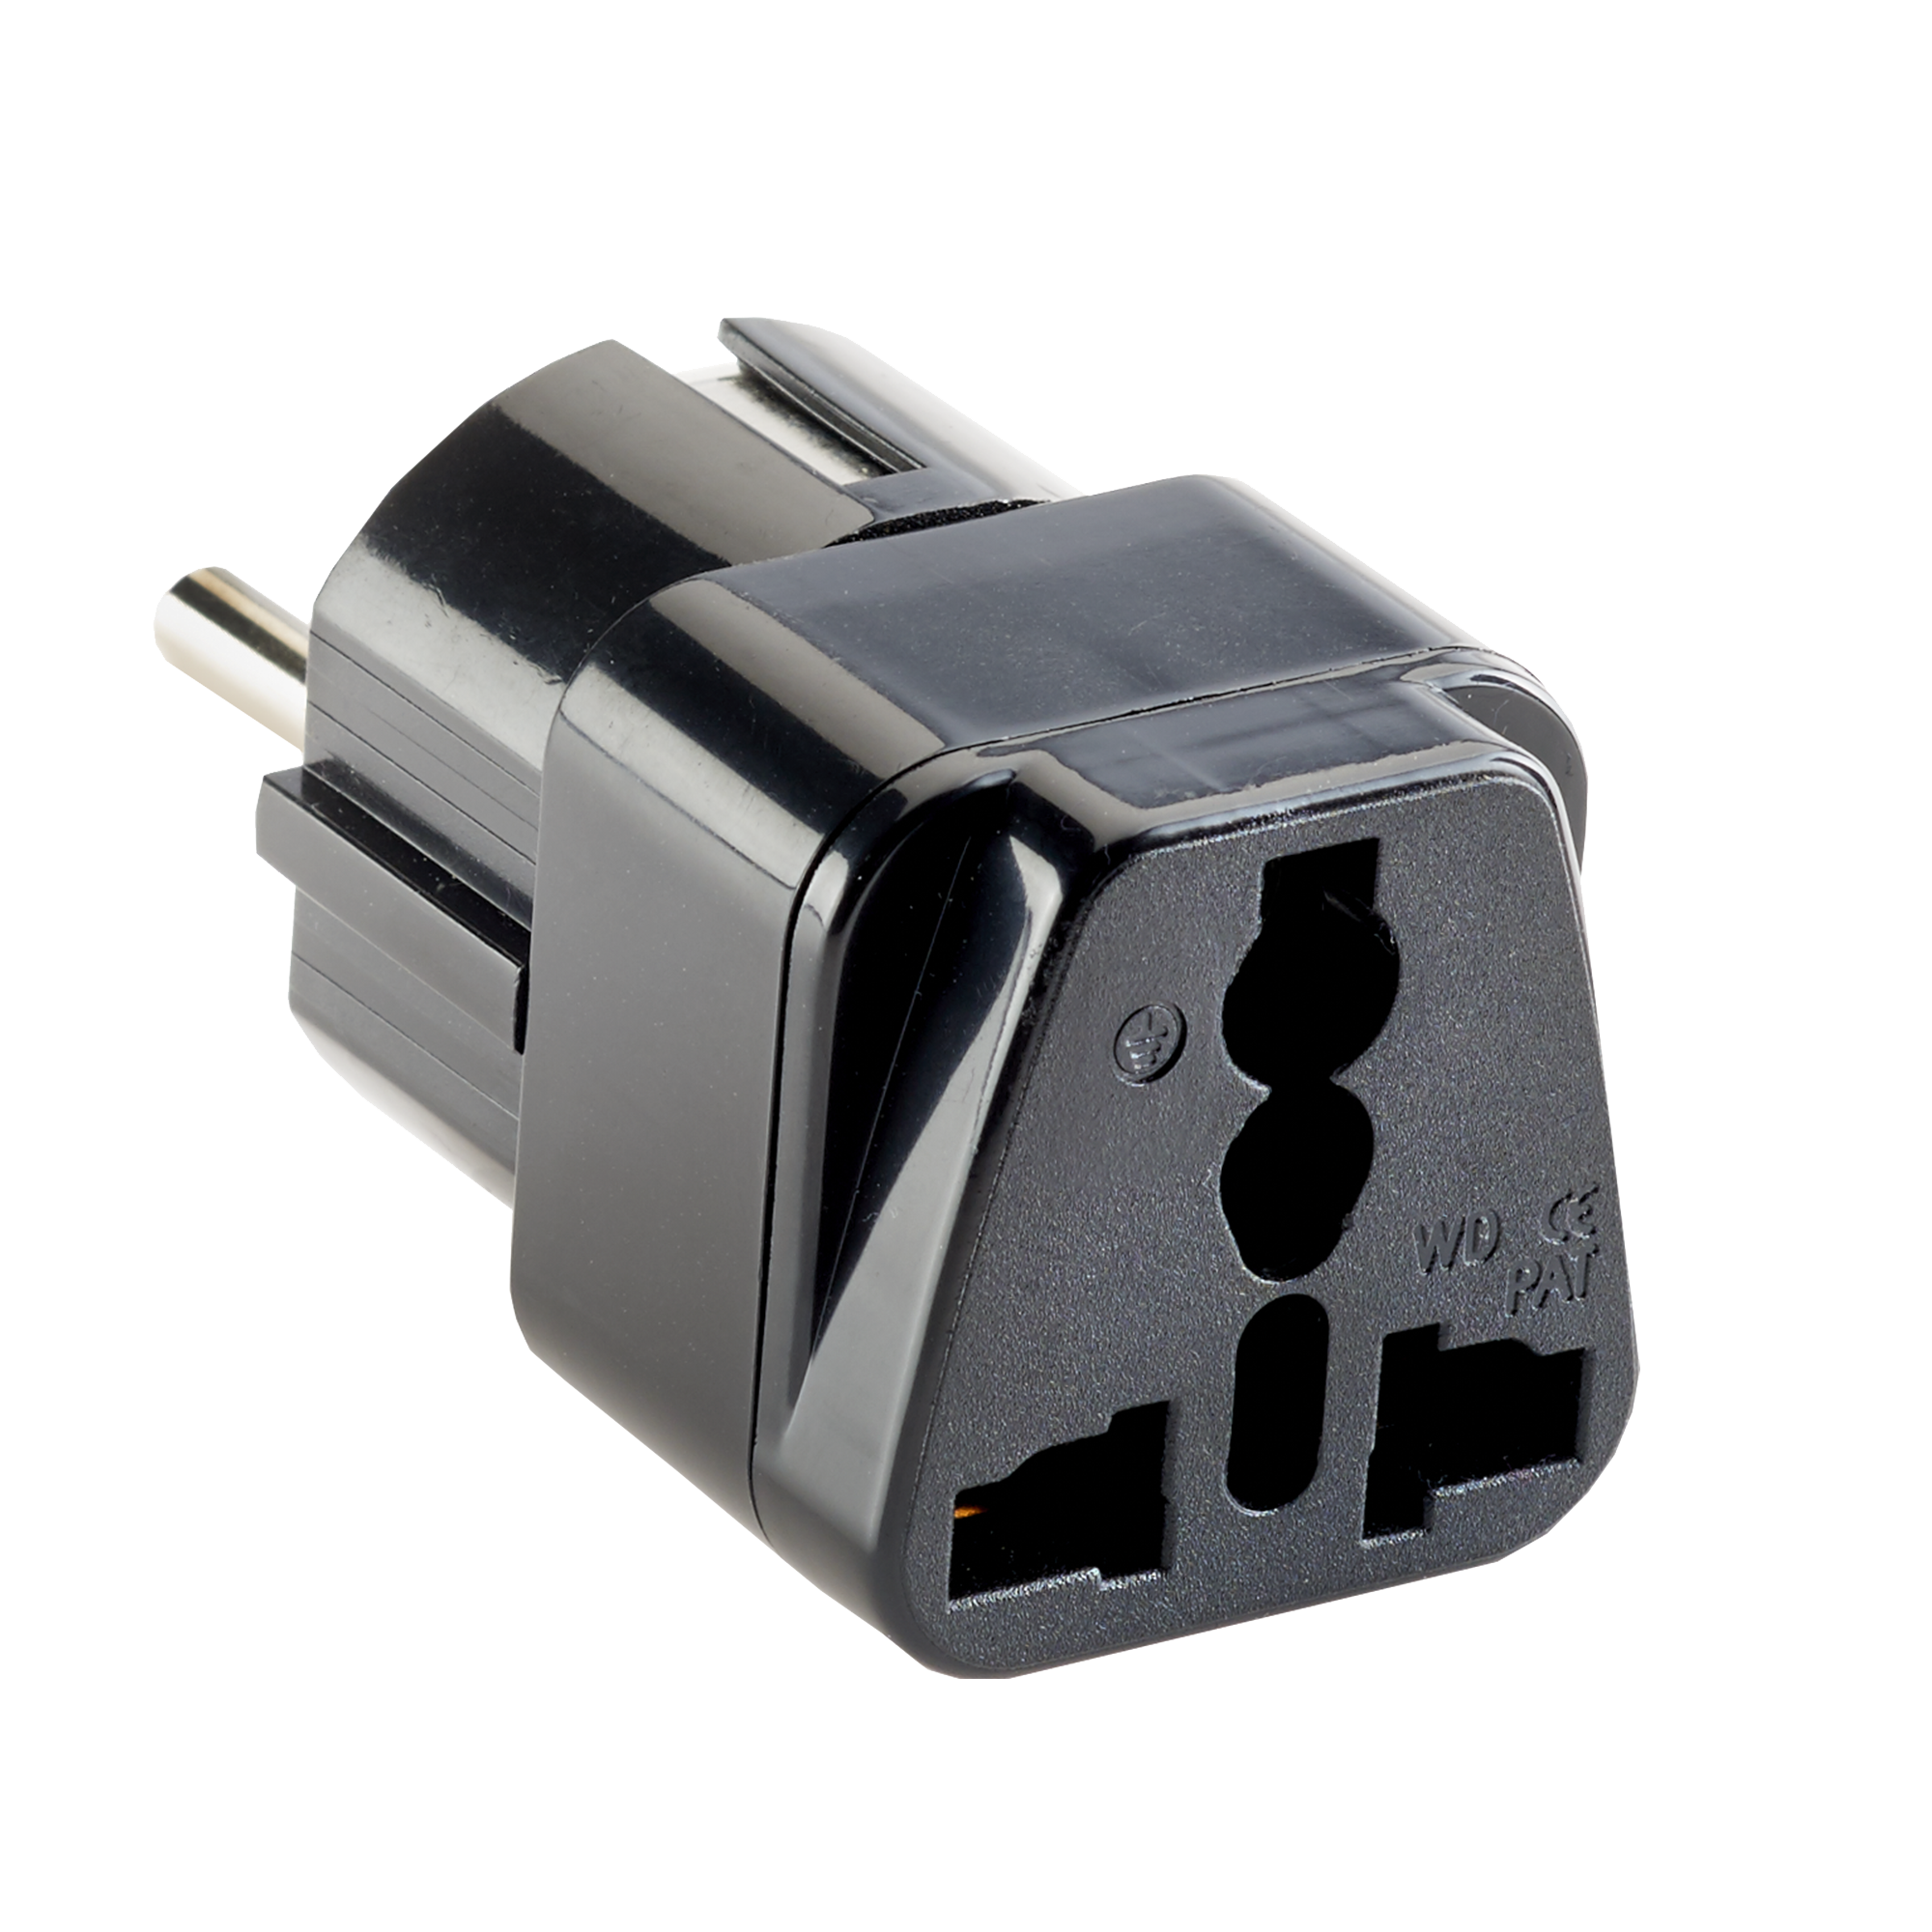 International Power Plug Adapter for IEC-320-C13 Outlets